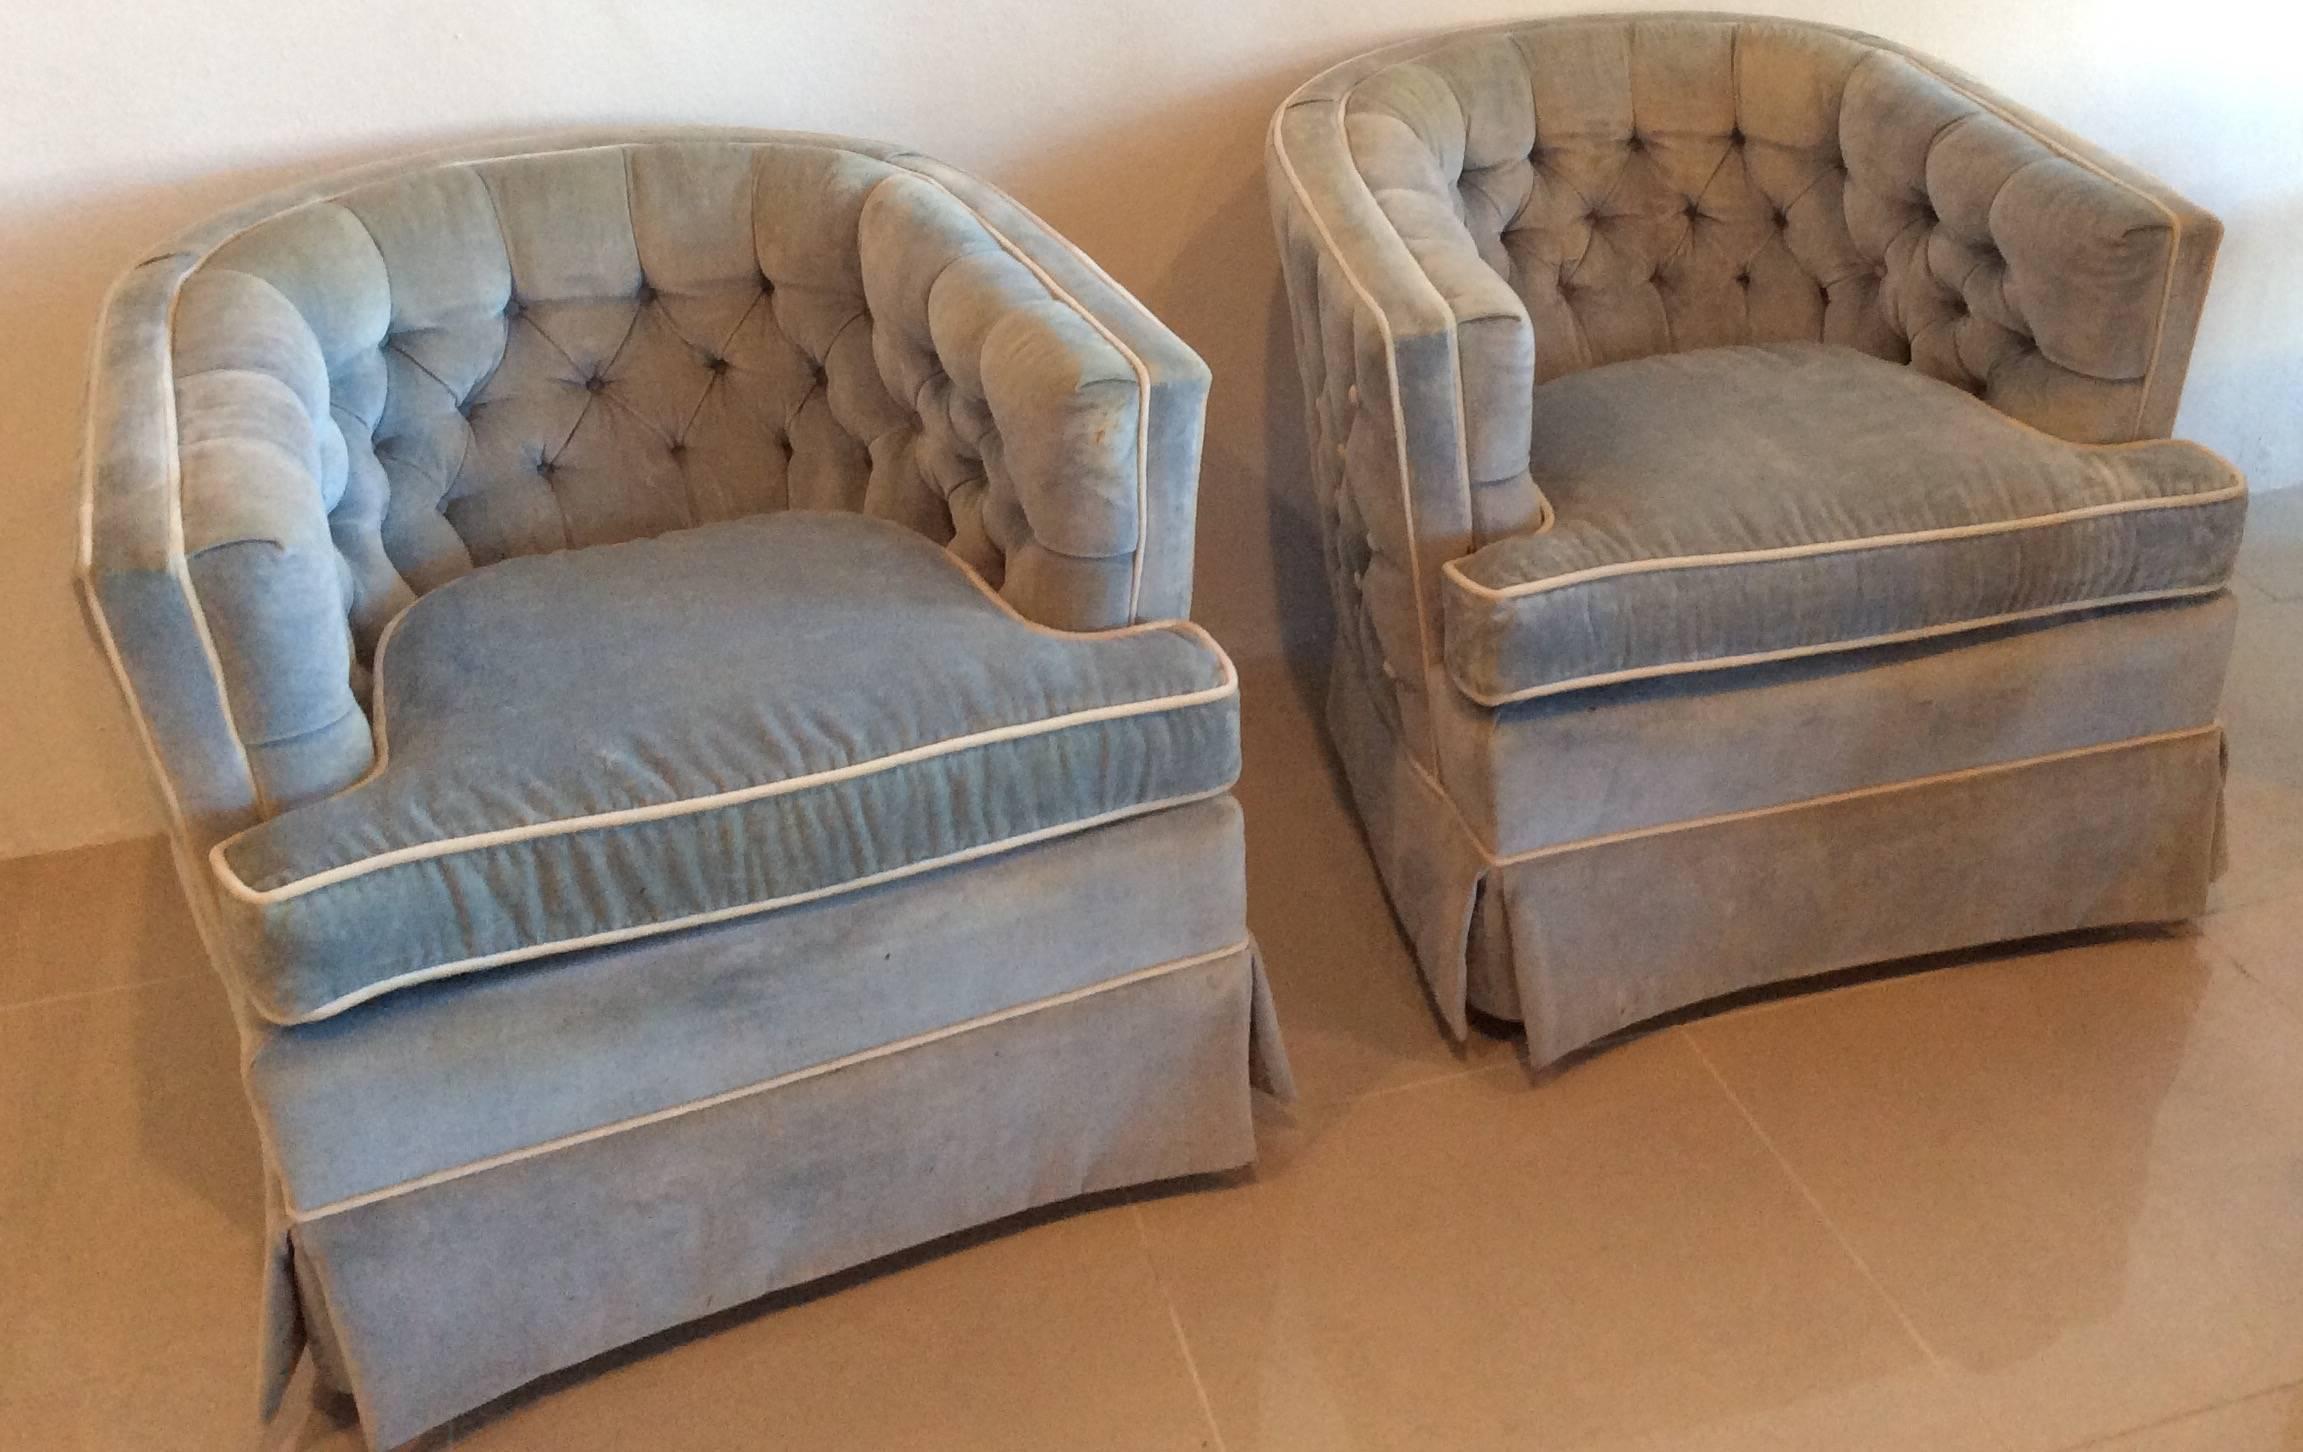 Pair of vintage swivel button tufted barrel, tub shaped club, lounge chairs. Tufted backs and front. Original vintage fabric which may have some stains and fading. New upholstery is recommended. Great Hollywood palm beach Regency flair. One missing